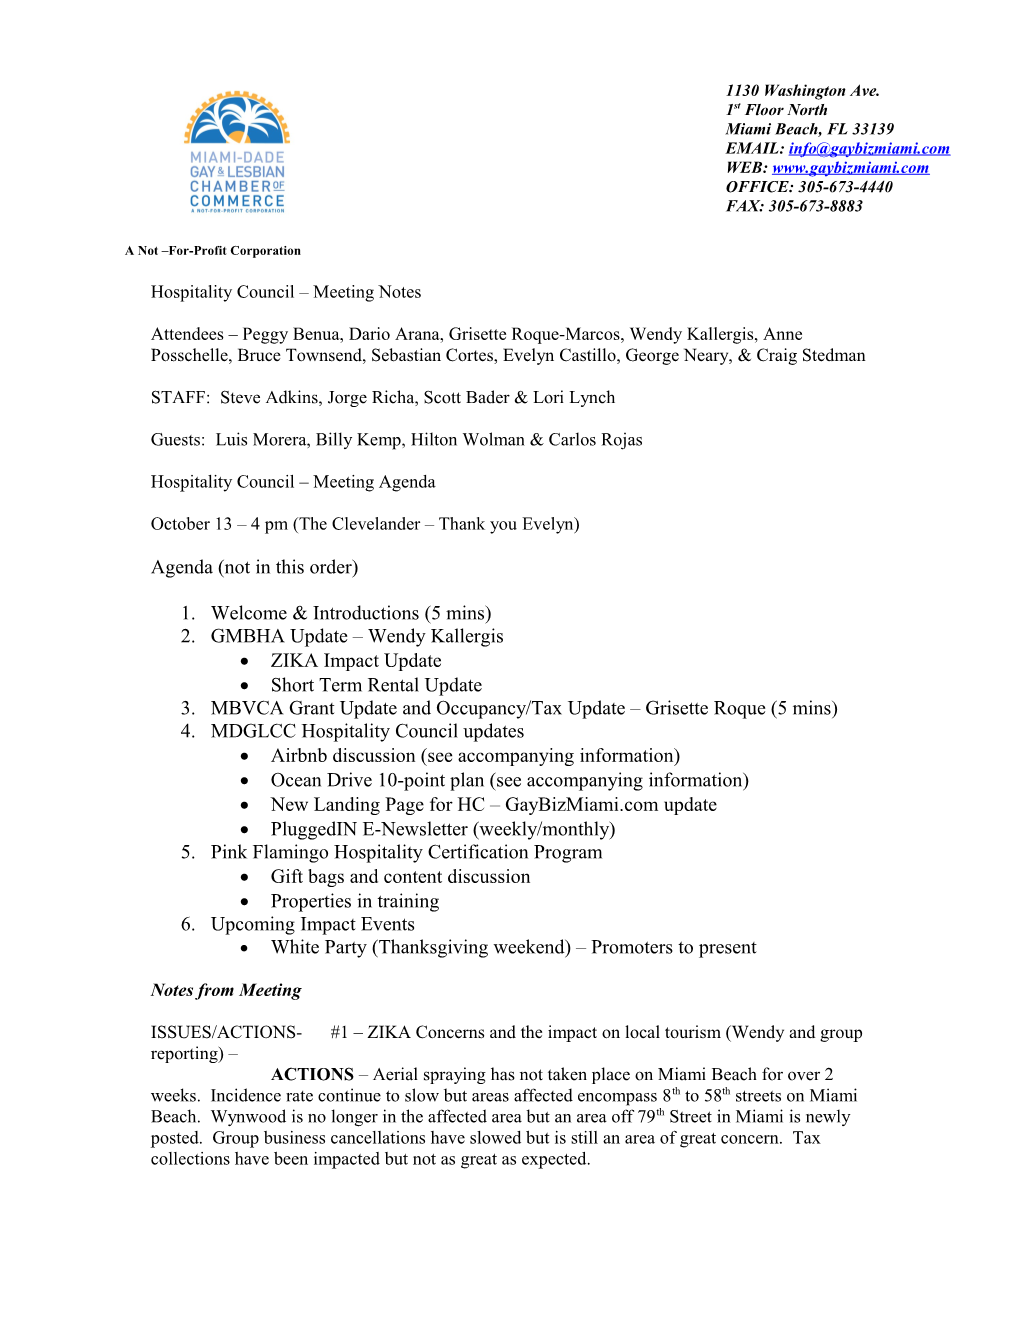 Hospitality Council Meeting Notes